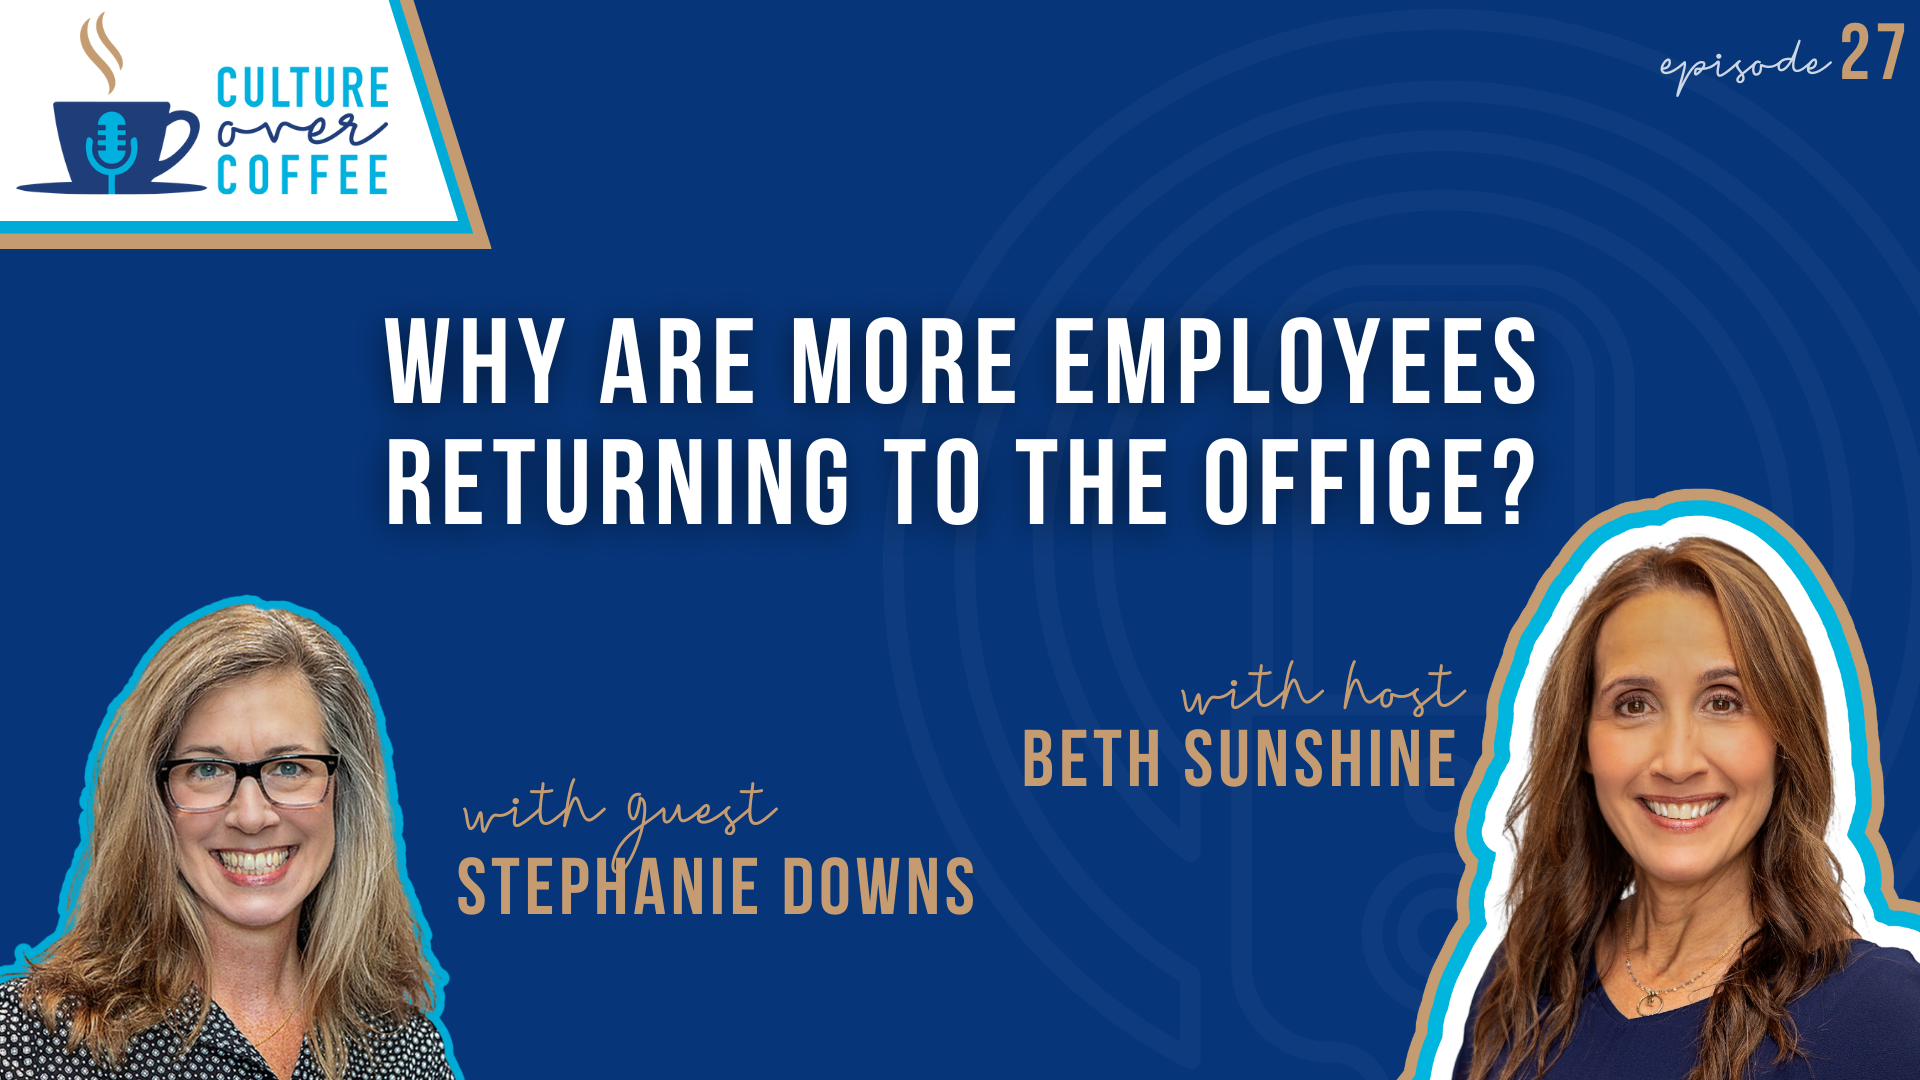 Why Are More Employees Returning to the Office? With Stephanie Downs